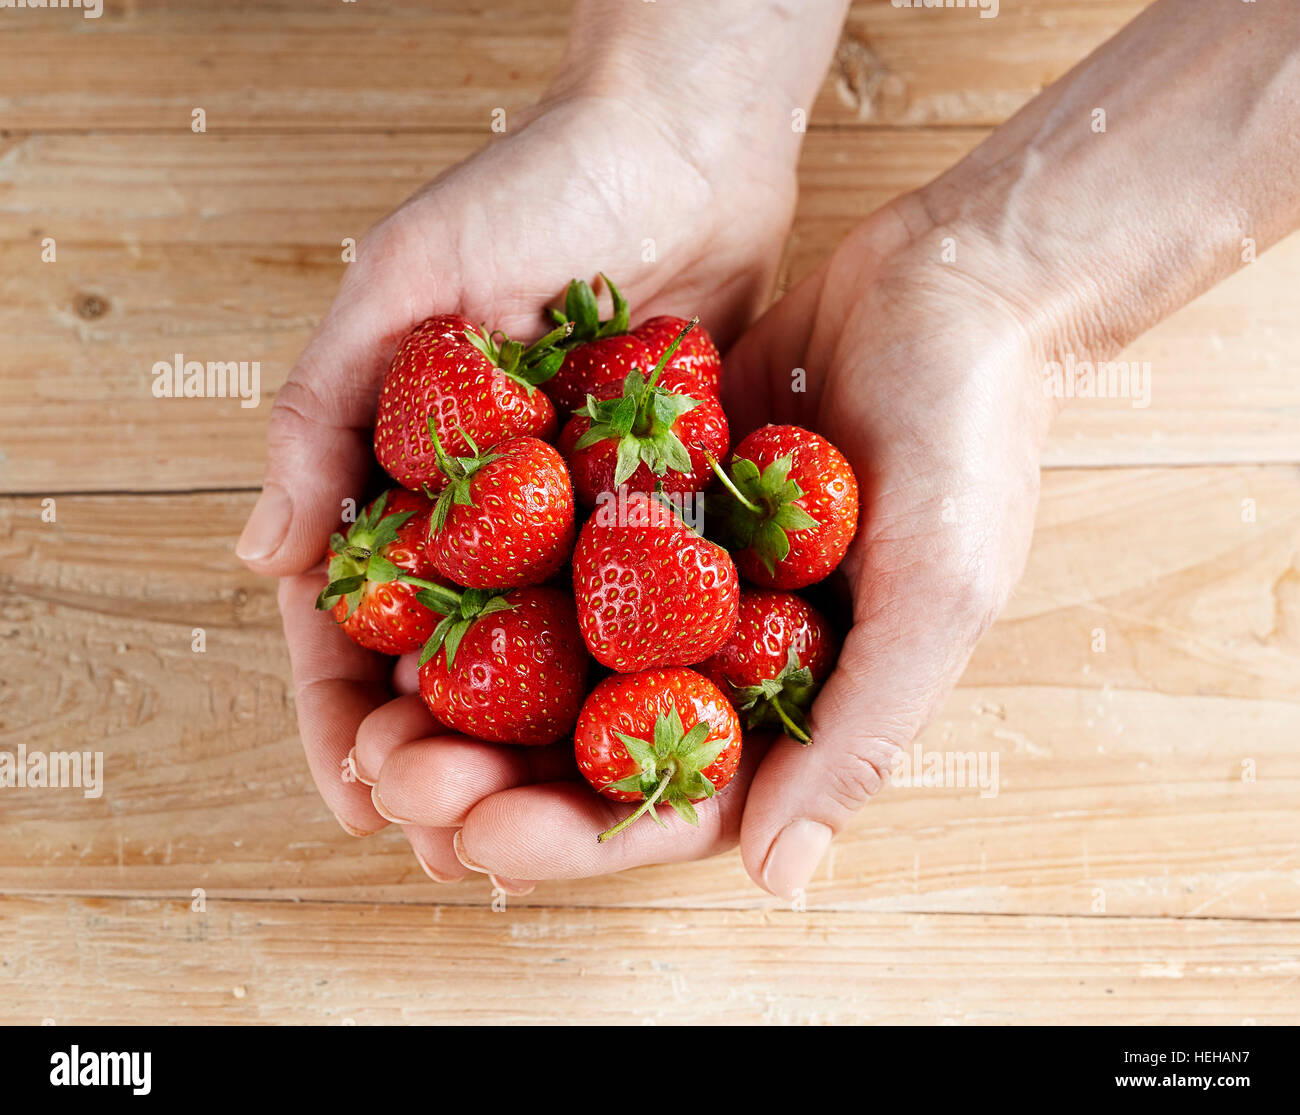 cupped hands holding strawberries fruit red portion stalks fresh picked white skin pale wooden table top abundant offering giving Strawberry Fragaria Stock Photo